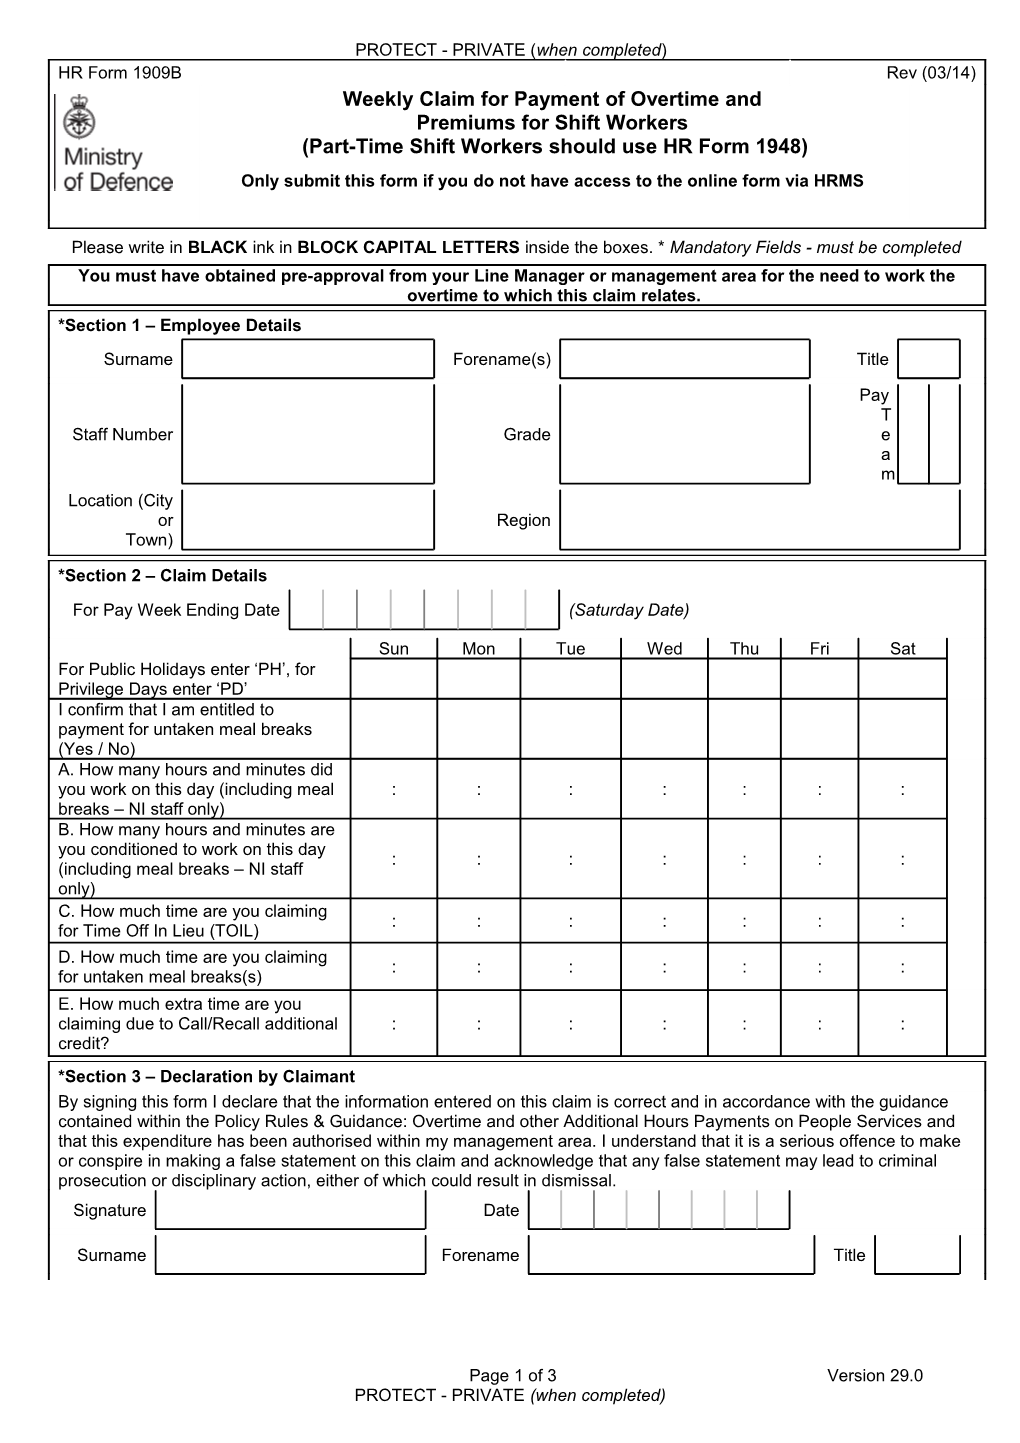 HR Form 1909B: Weekly Claim for Payment of Overtime and Premiums for Shift Workers (Part-Time